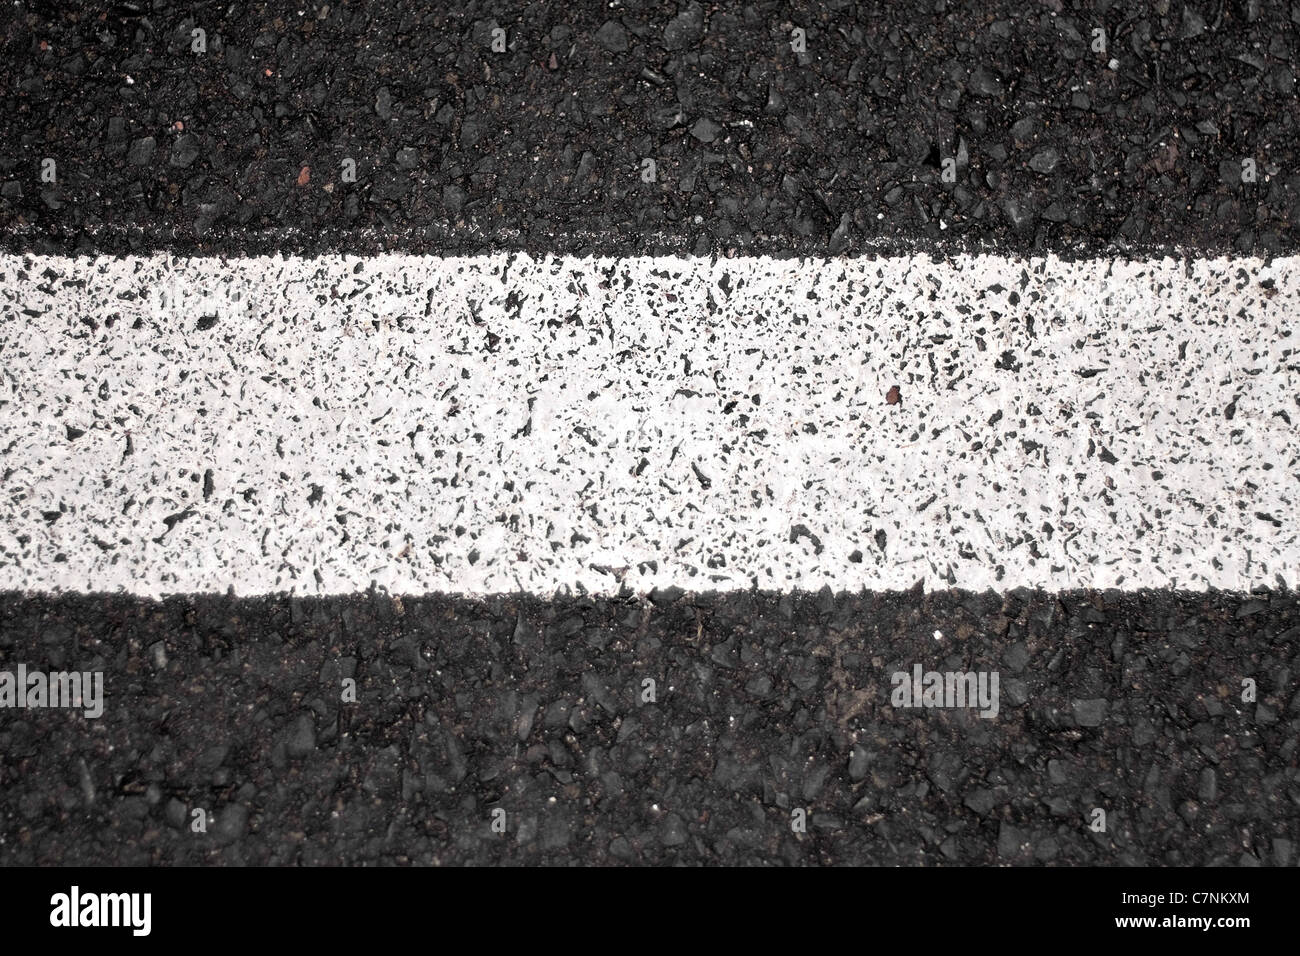 Closeup of a tar or asphalt pavement texture with a white line painted down the center. Stock Photo